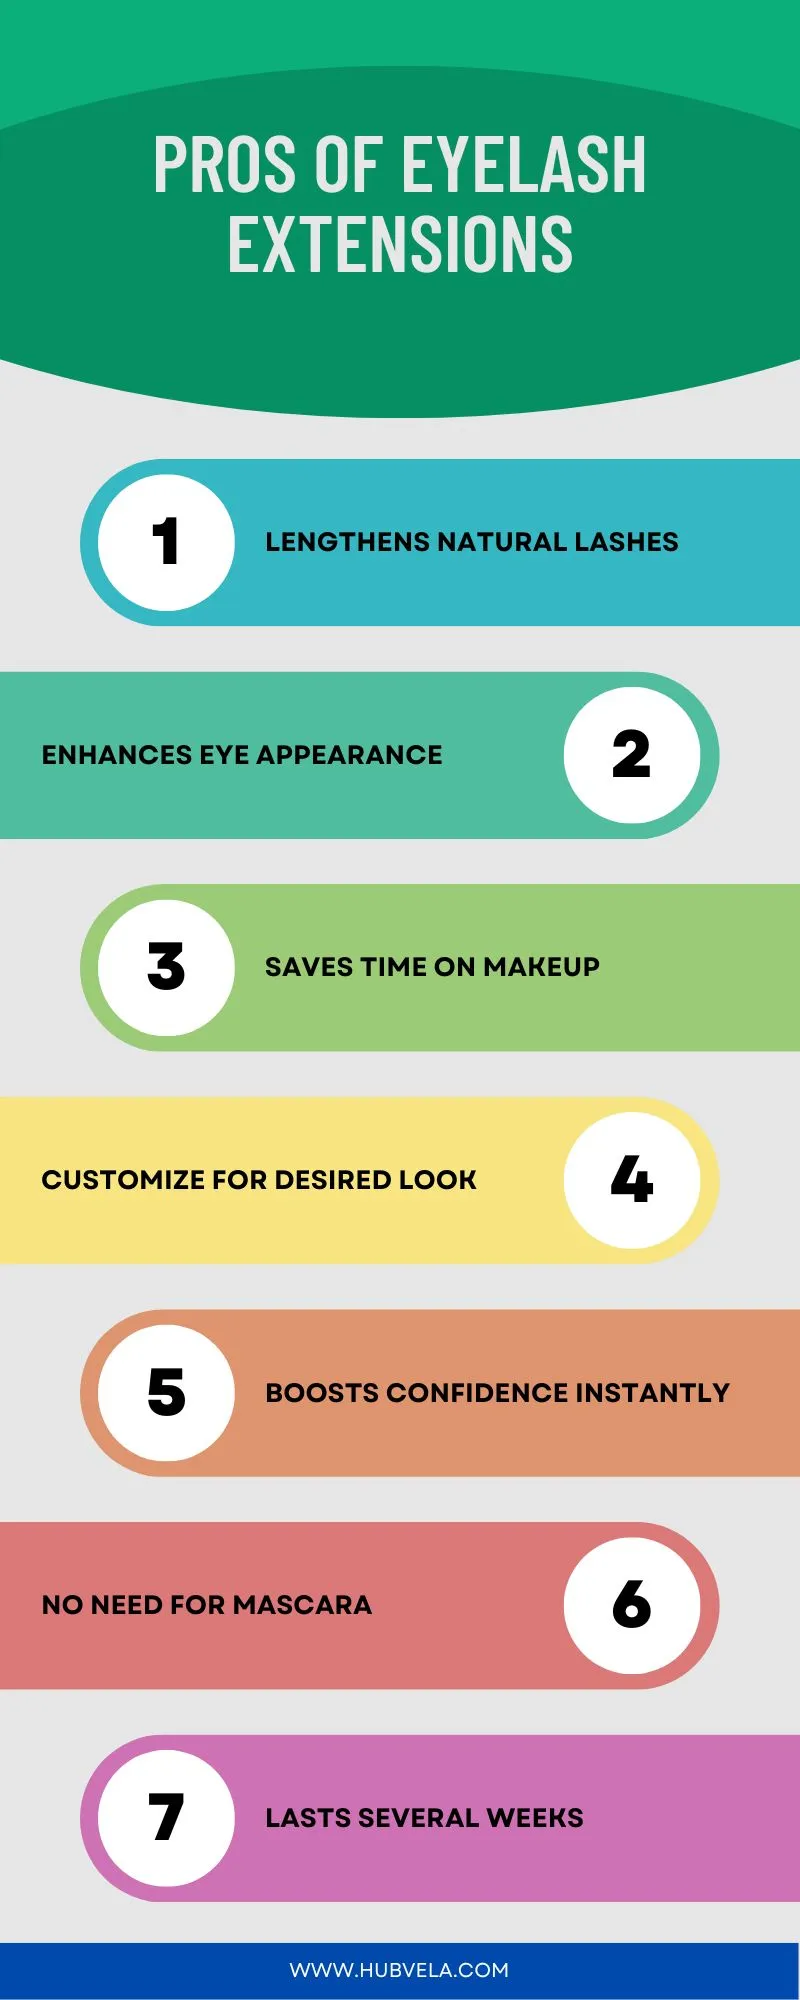 Pros of Eyelash Extensions Infographic